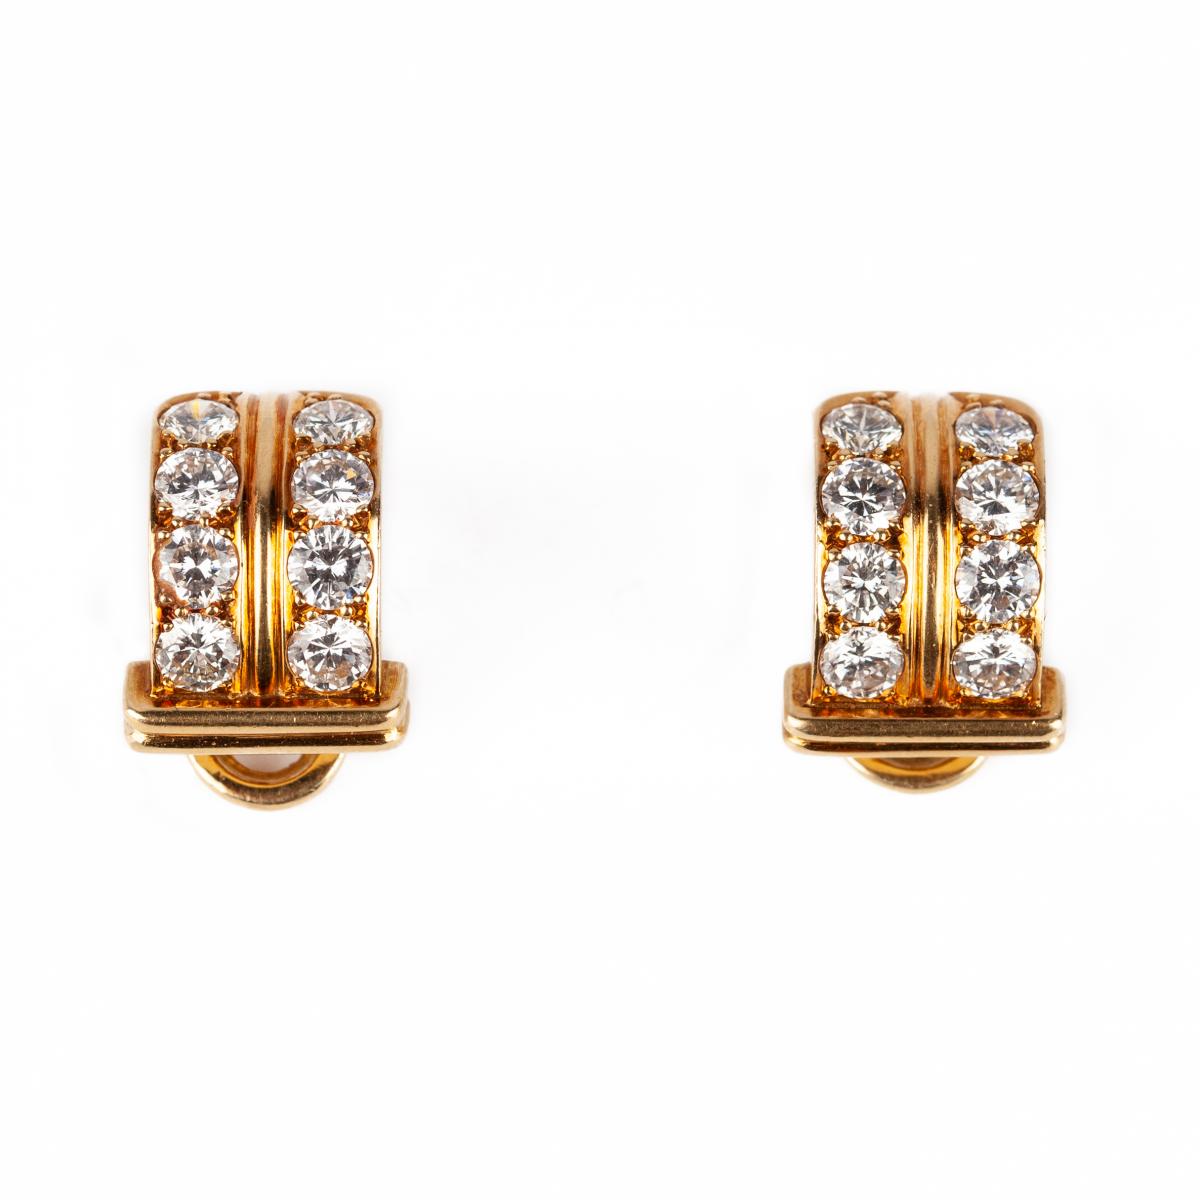 Vintage Creole Shaped Earrings in 18 Karat Gold and Diamonds, French circa 1950.